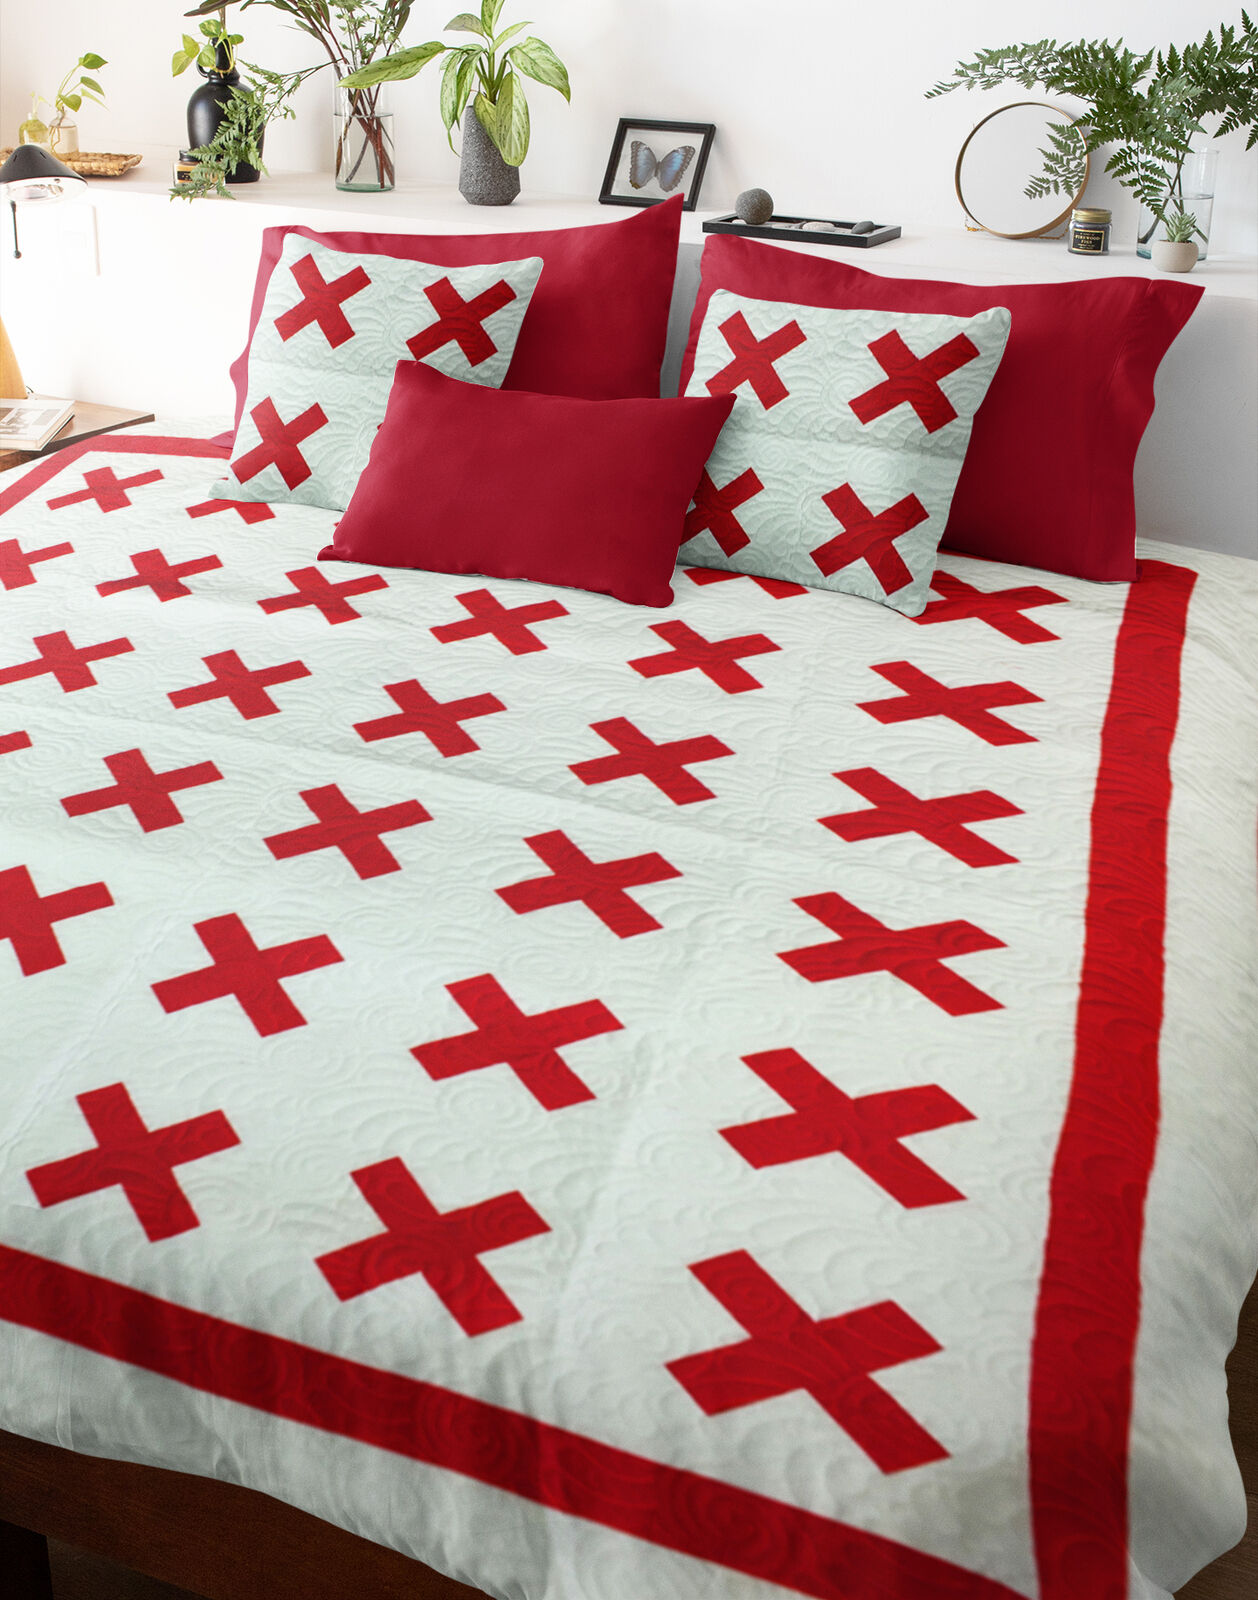 Red & White Red Cross Design FINISHED QUILT - Intricate feathers